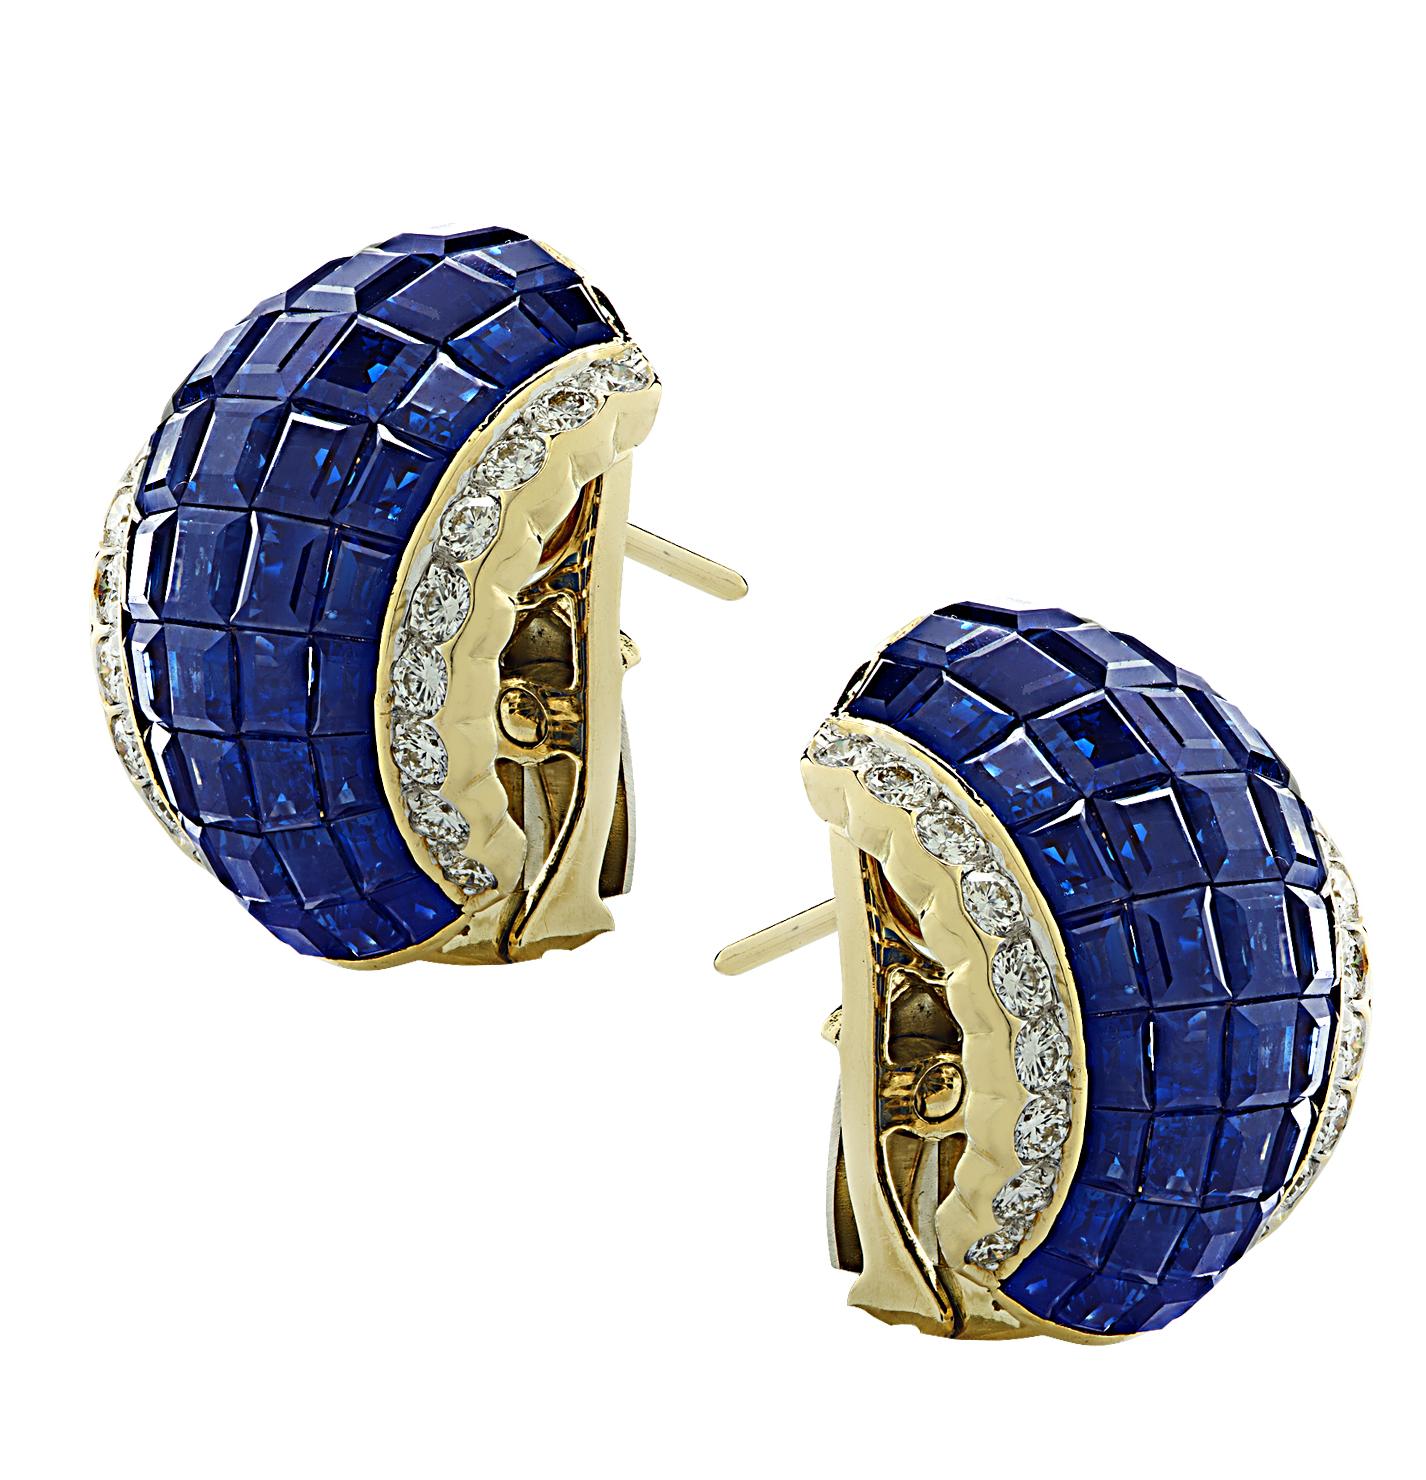 Spectacular Vivid Diamonds Sapphire and Diamond clip on earrings crafted in 18 carat yellow gold, showcasing 90 exquisite sapphires weighing 11 carats total , and 36, round brilliant cut diamonds weighing approximately 1.00 carats total, F color,